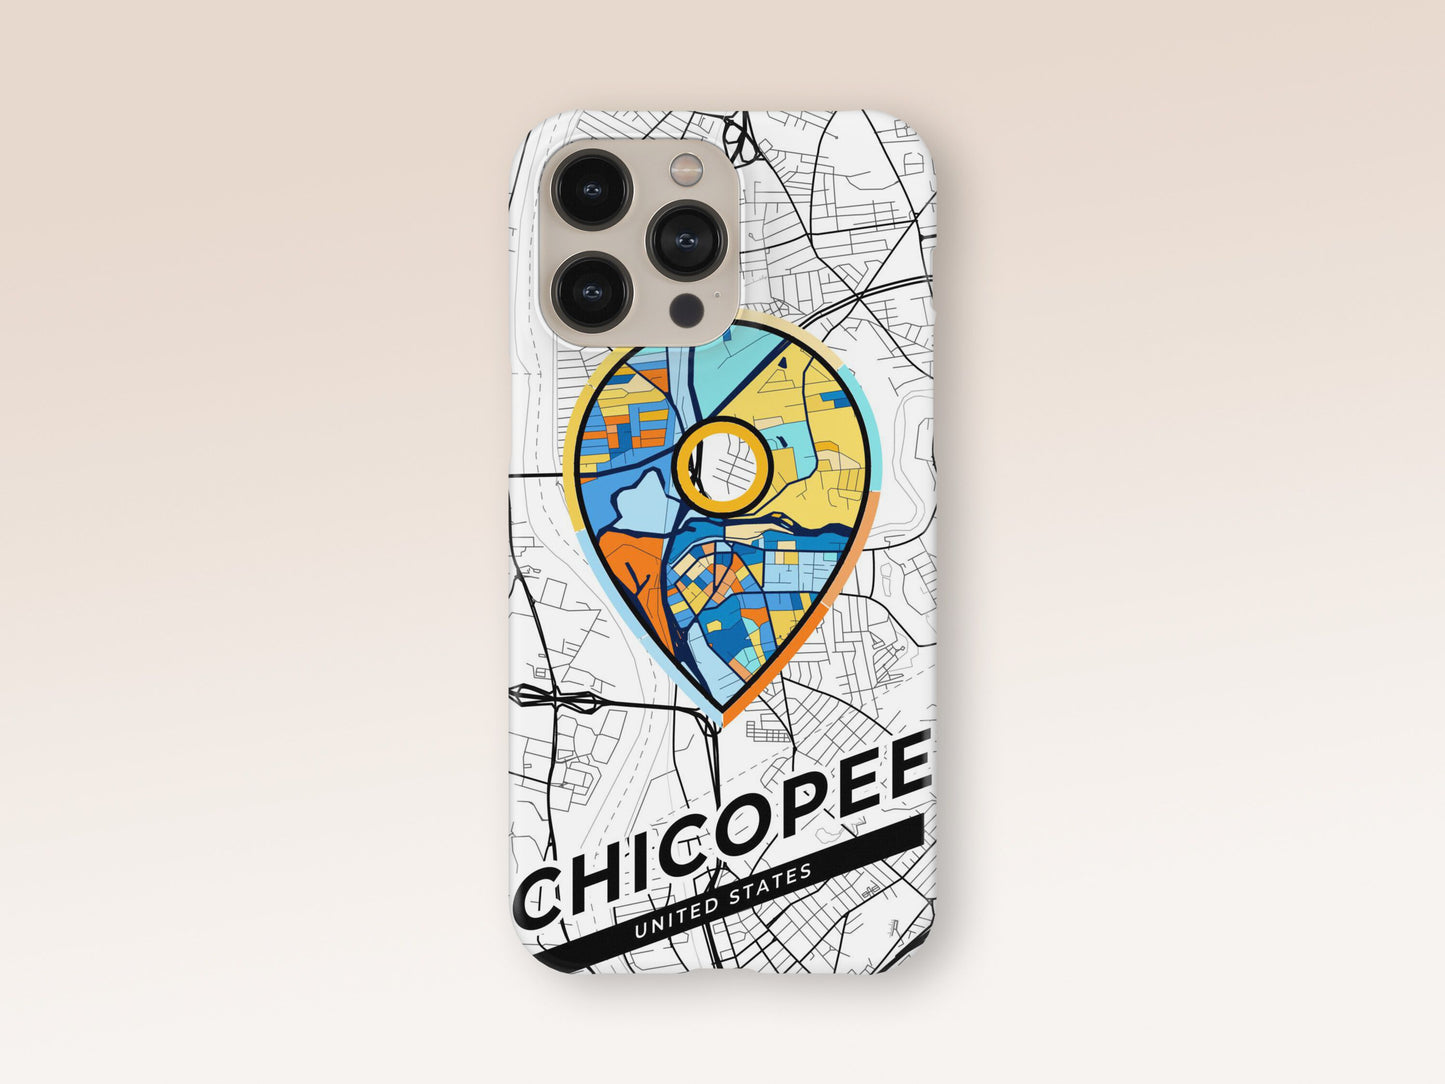 Chicopee Massachusetts slim phone case with colorful icon. Birthday, wedding or housewarming gift. Couple match cases. 1